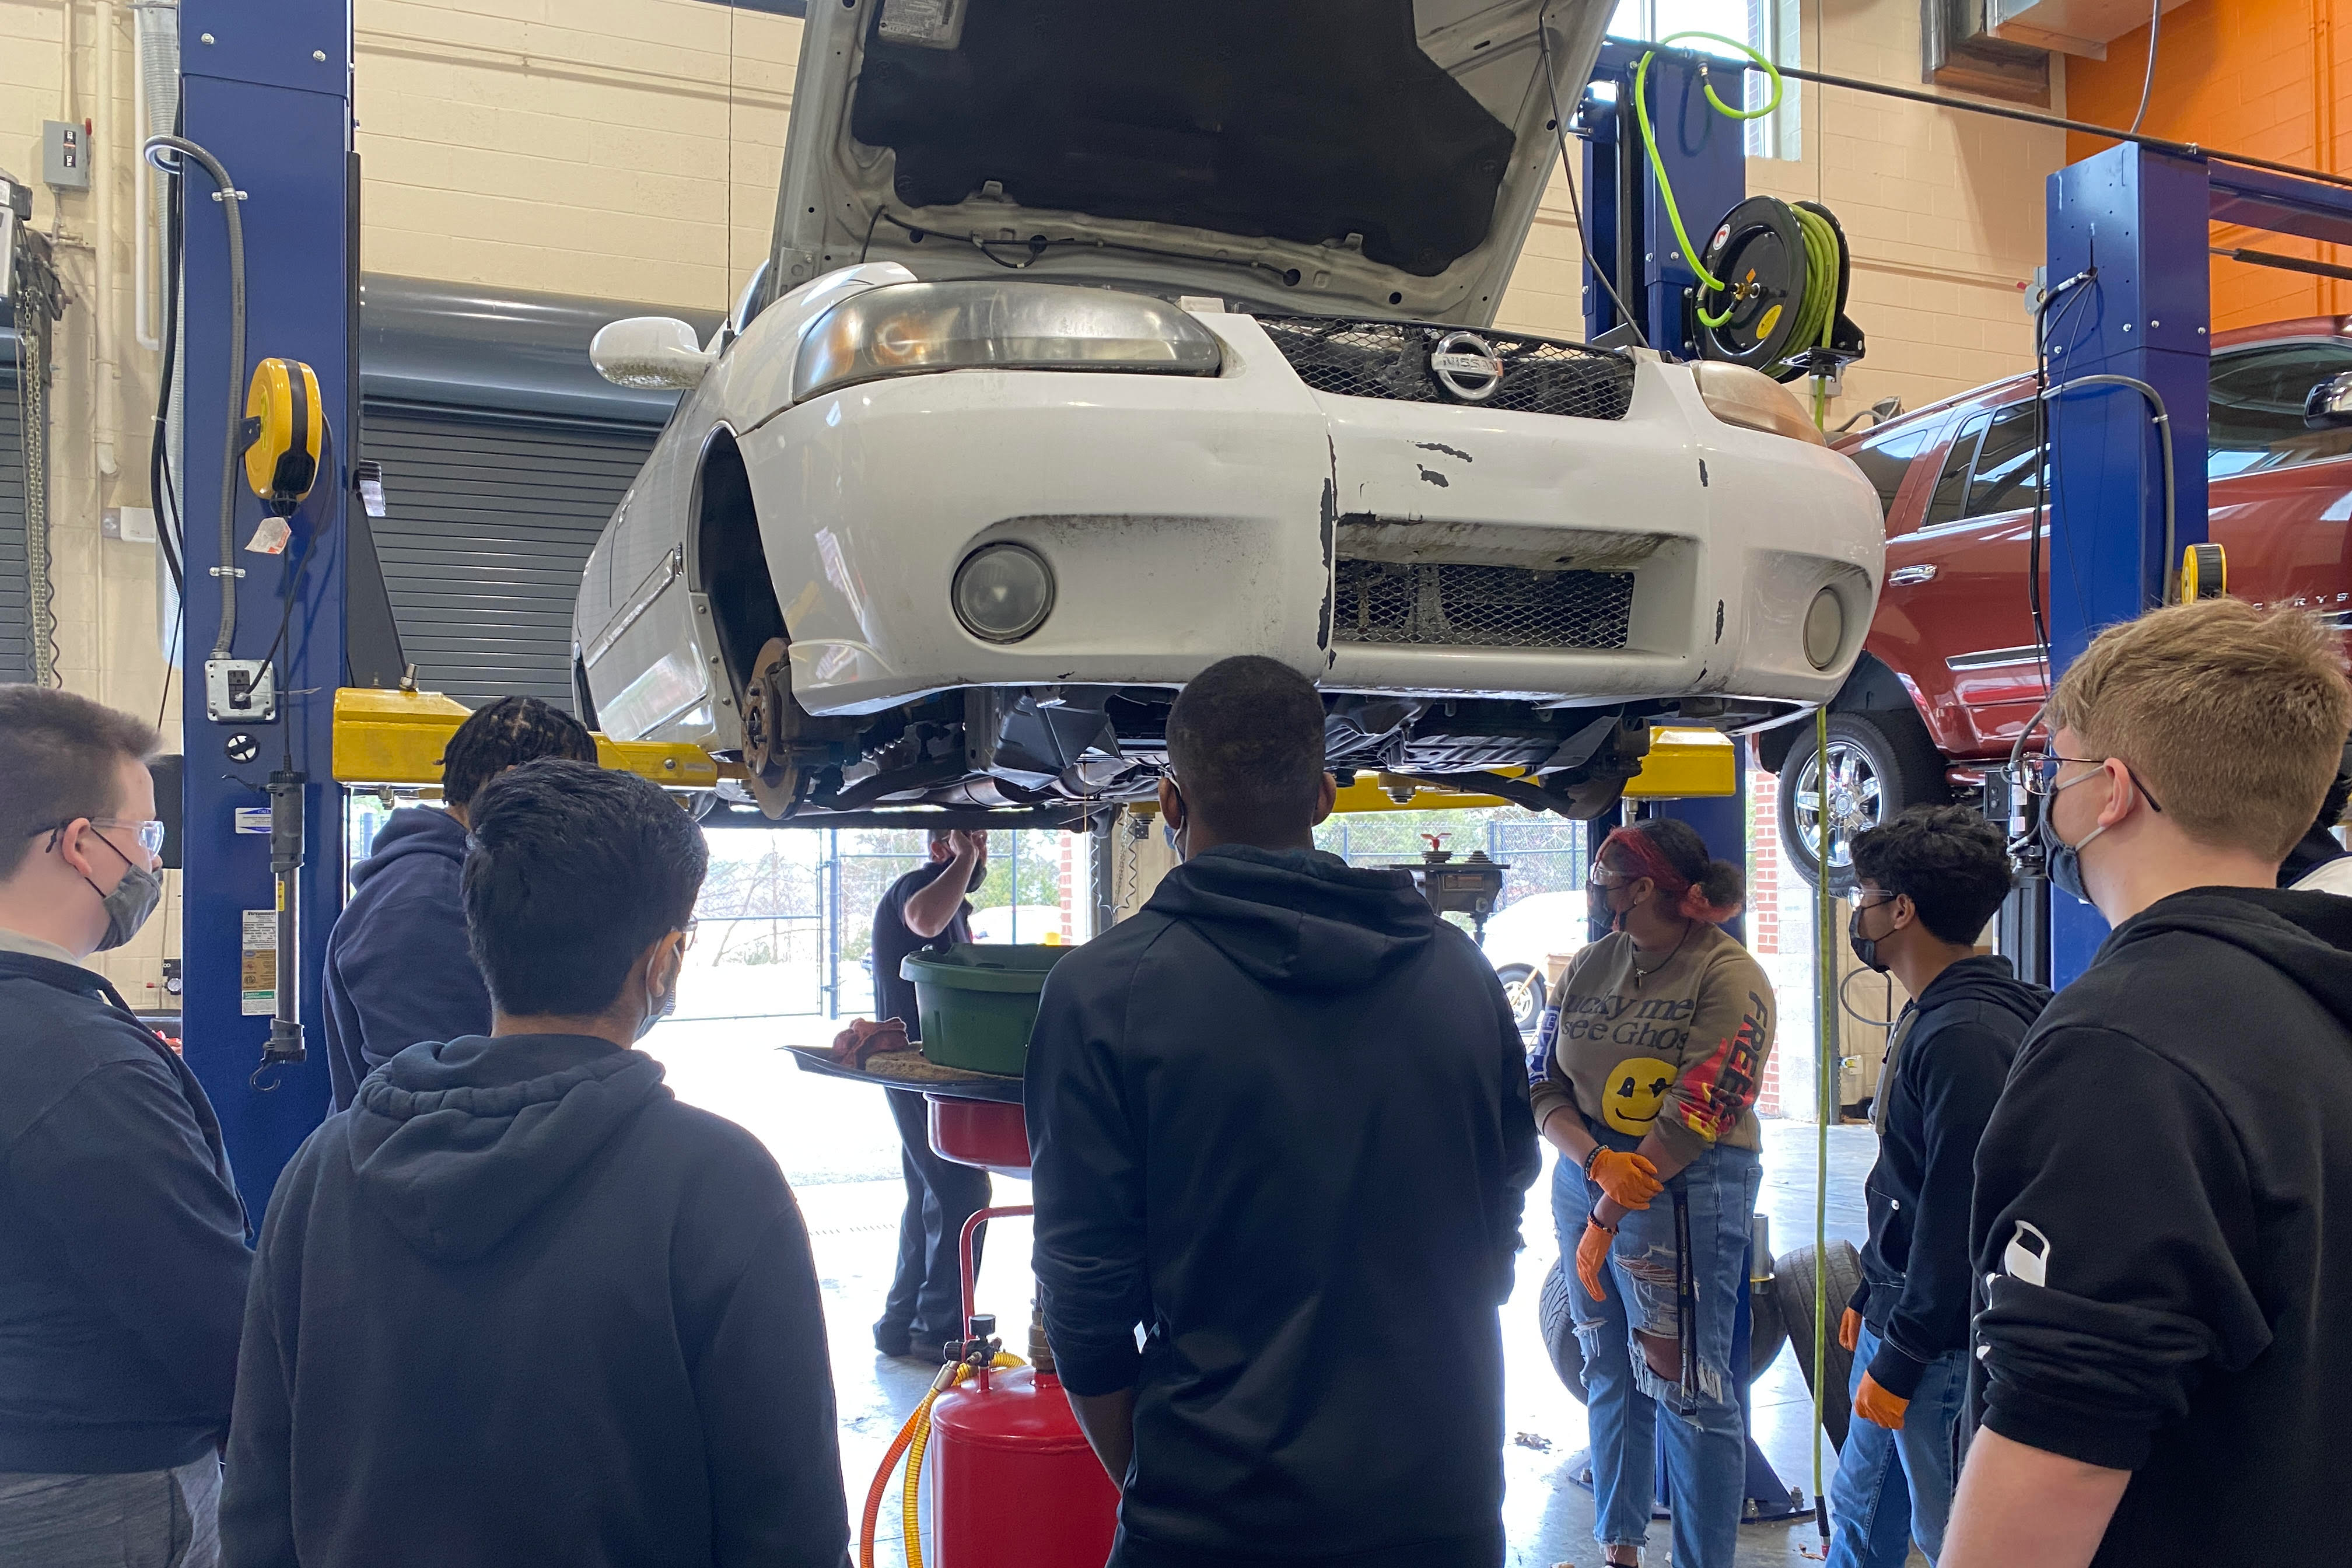 Students working on a car in a garage 